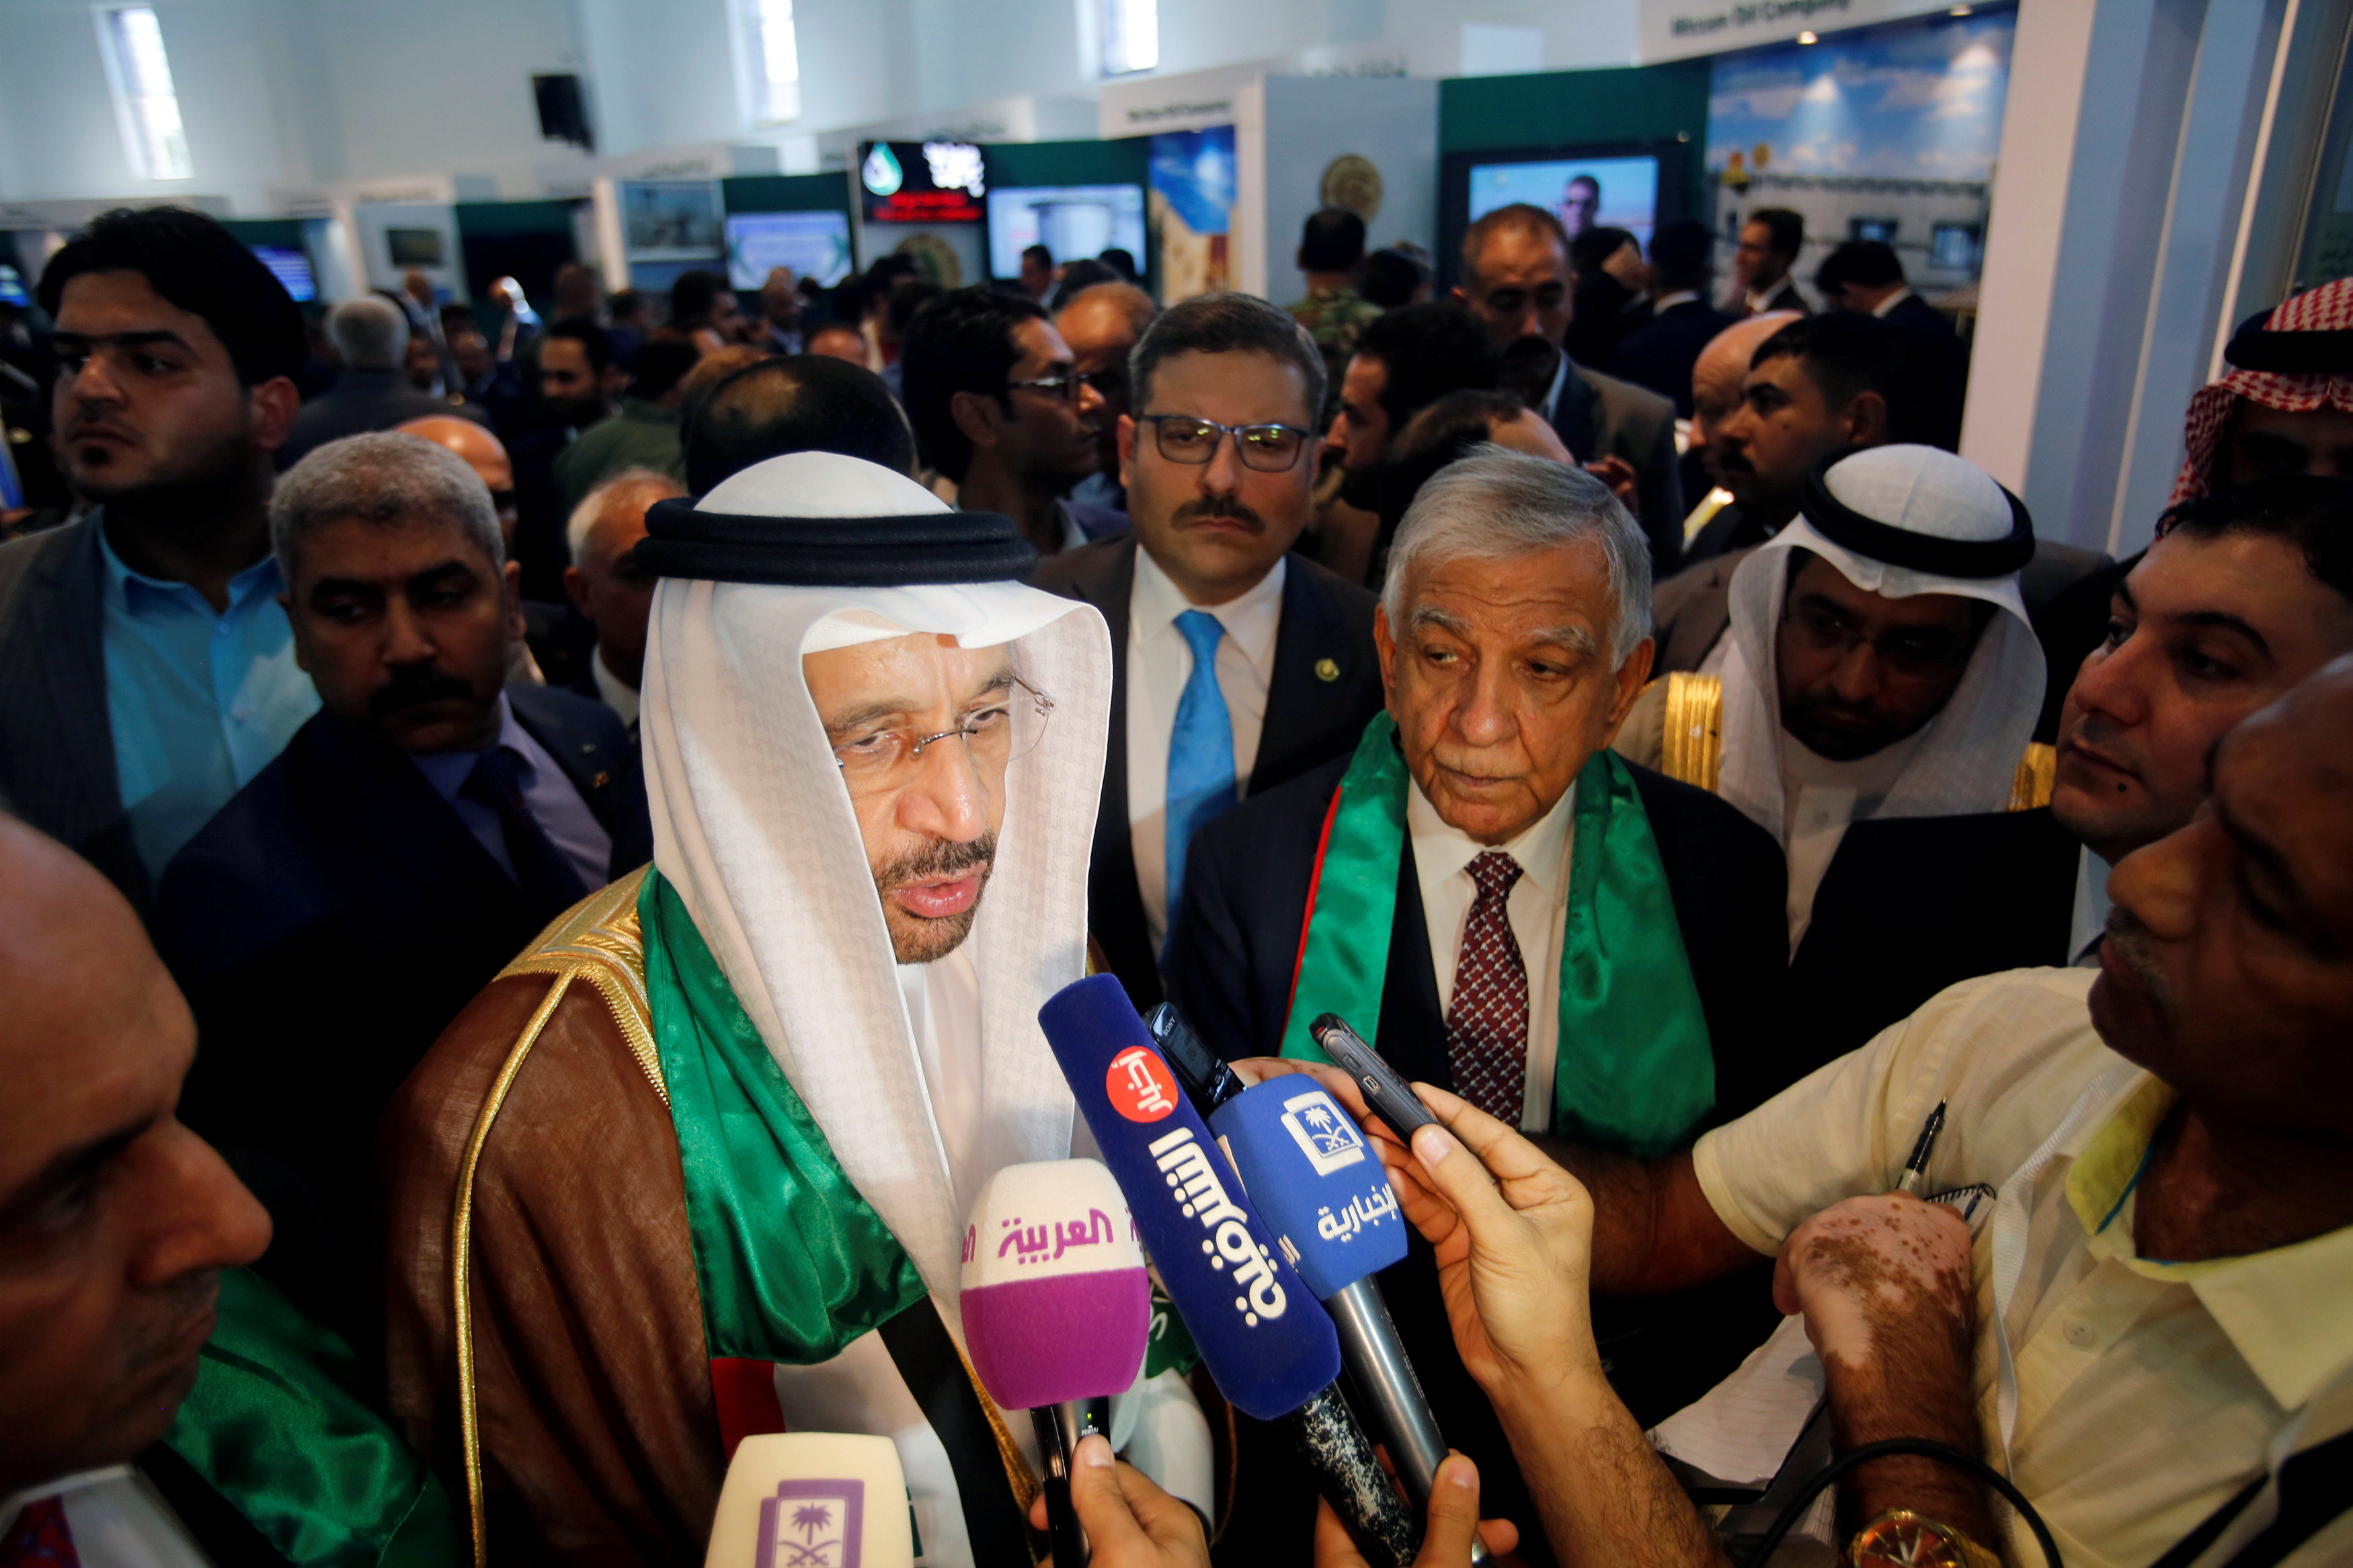 Saudi oil minister makes high profile visit to Iraq, calls for oil supply cooperation